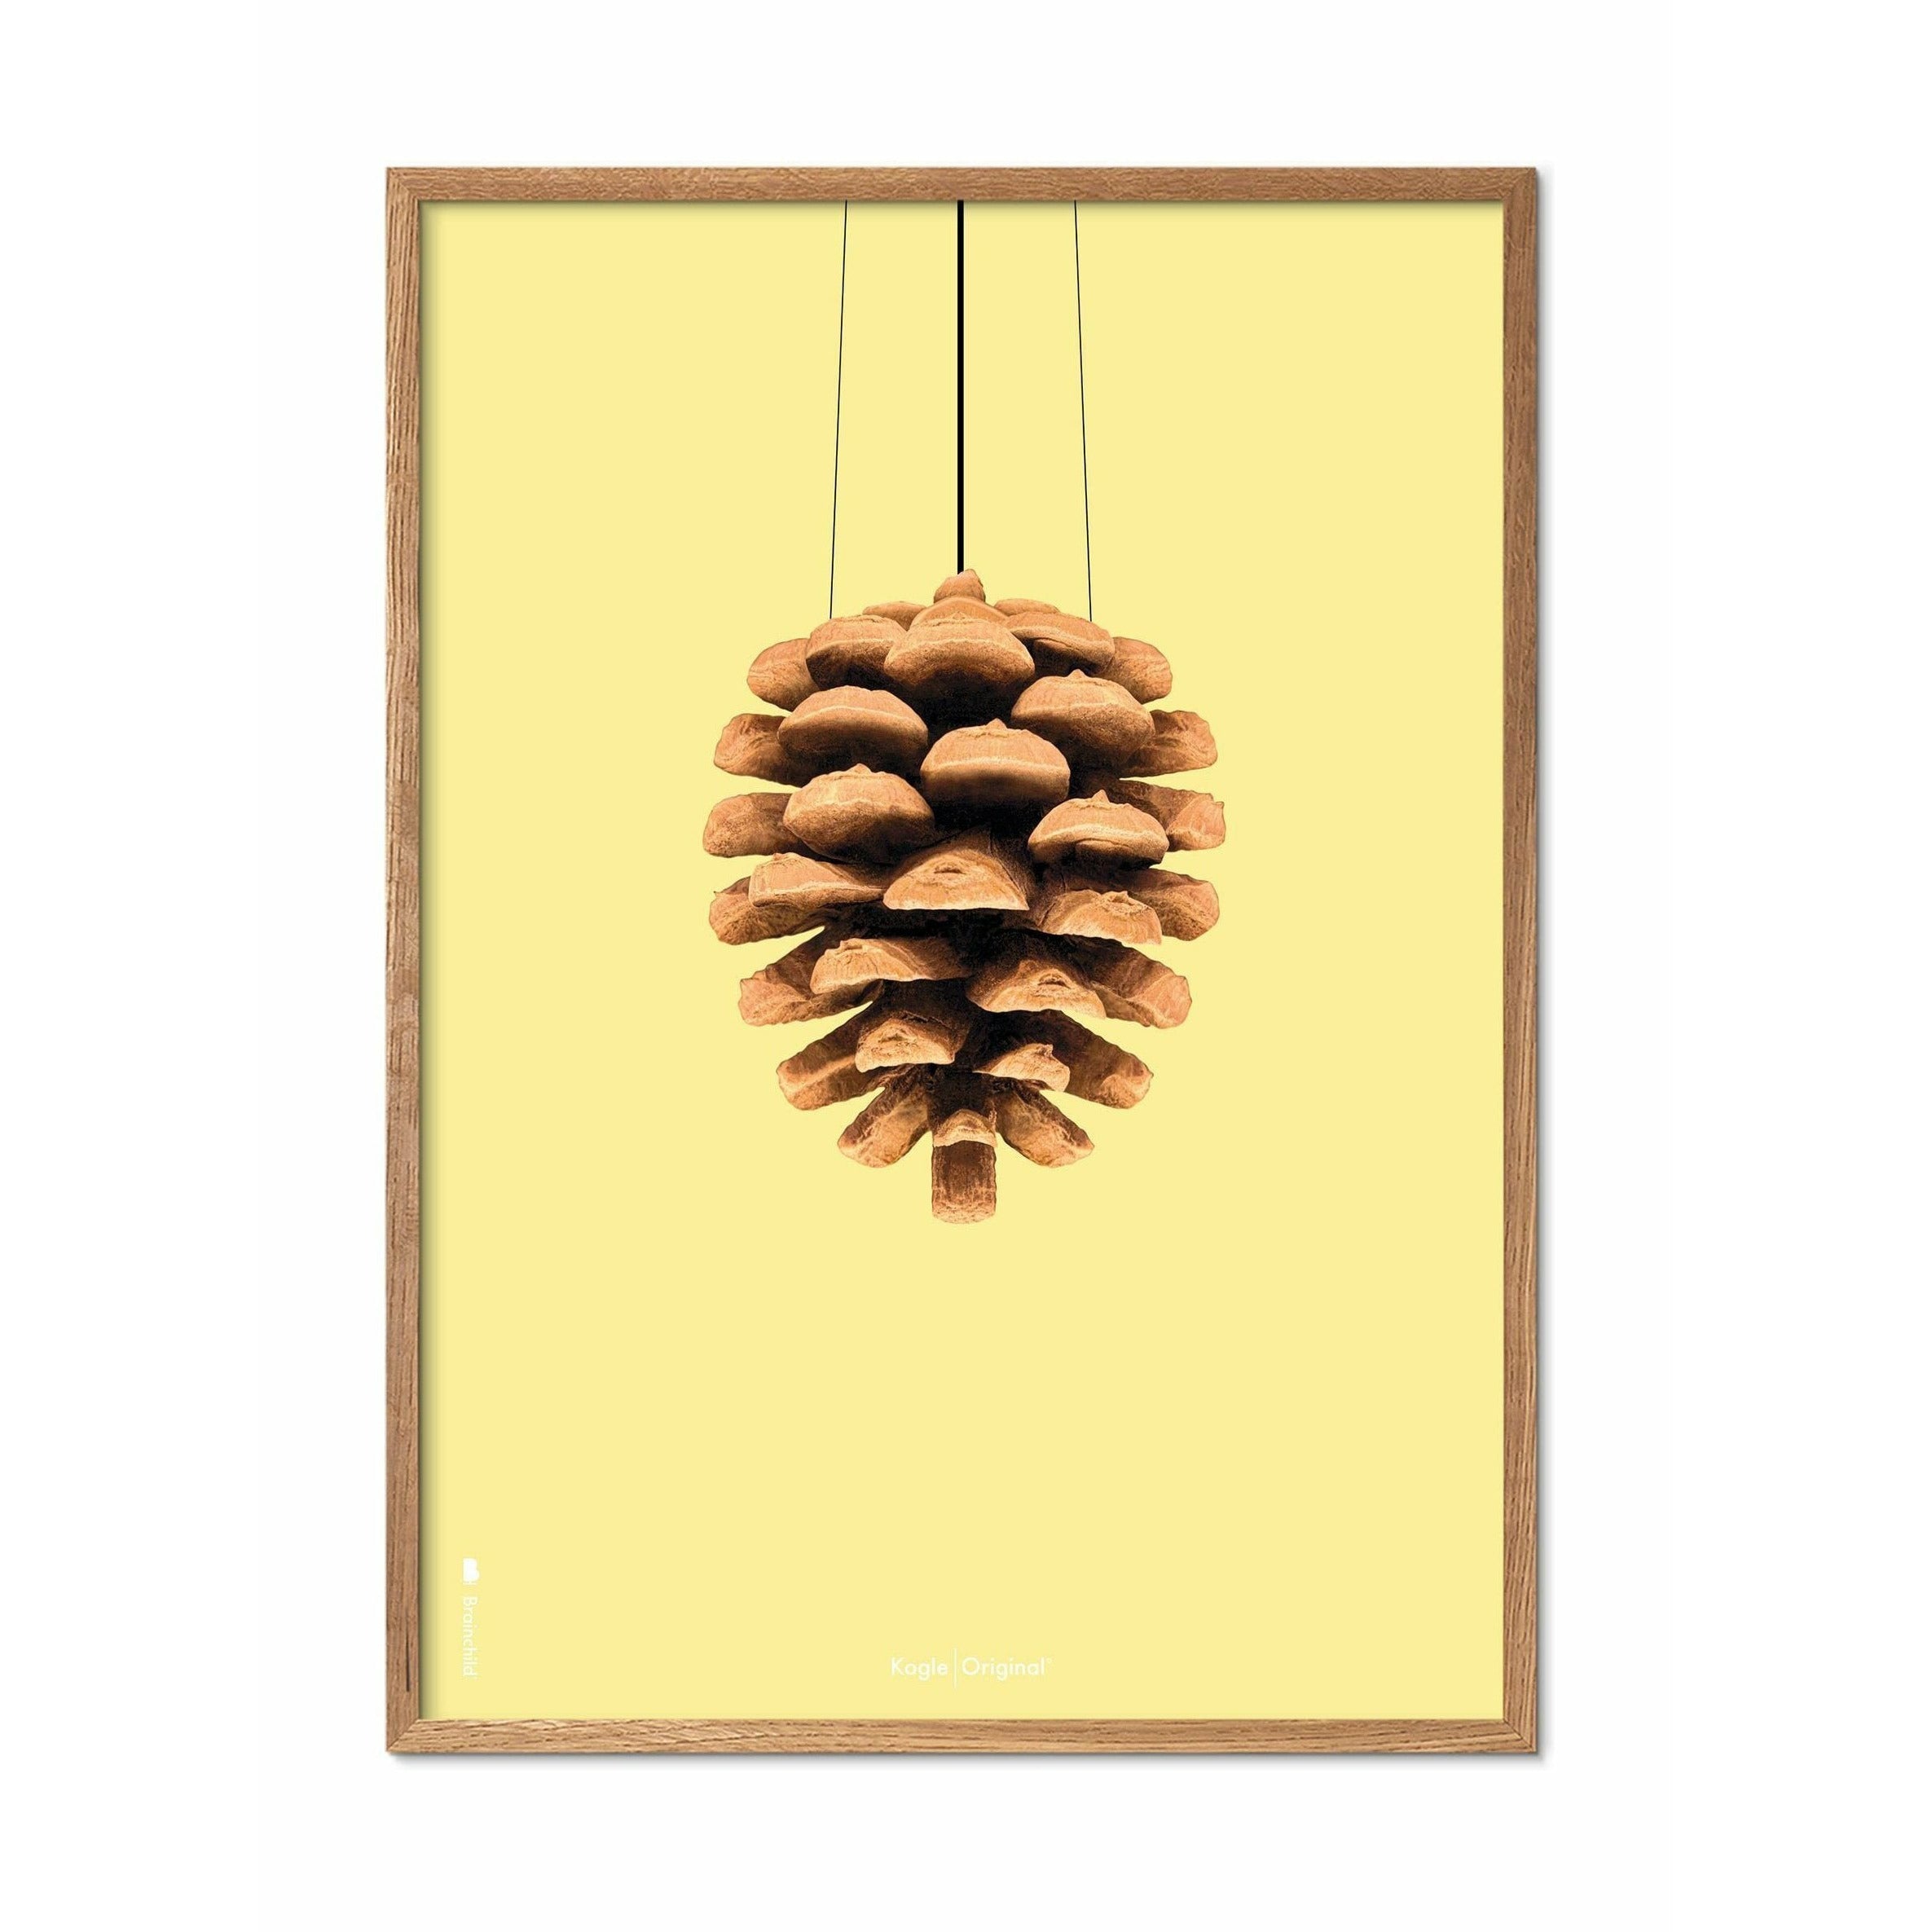 Brainchild Pine Cone Classic Poster, Frame Made Of Light Wood A5, Yellow Background